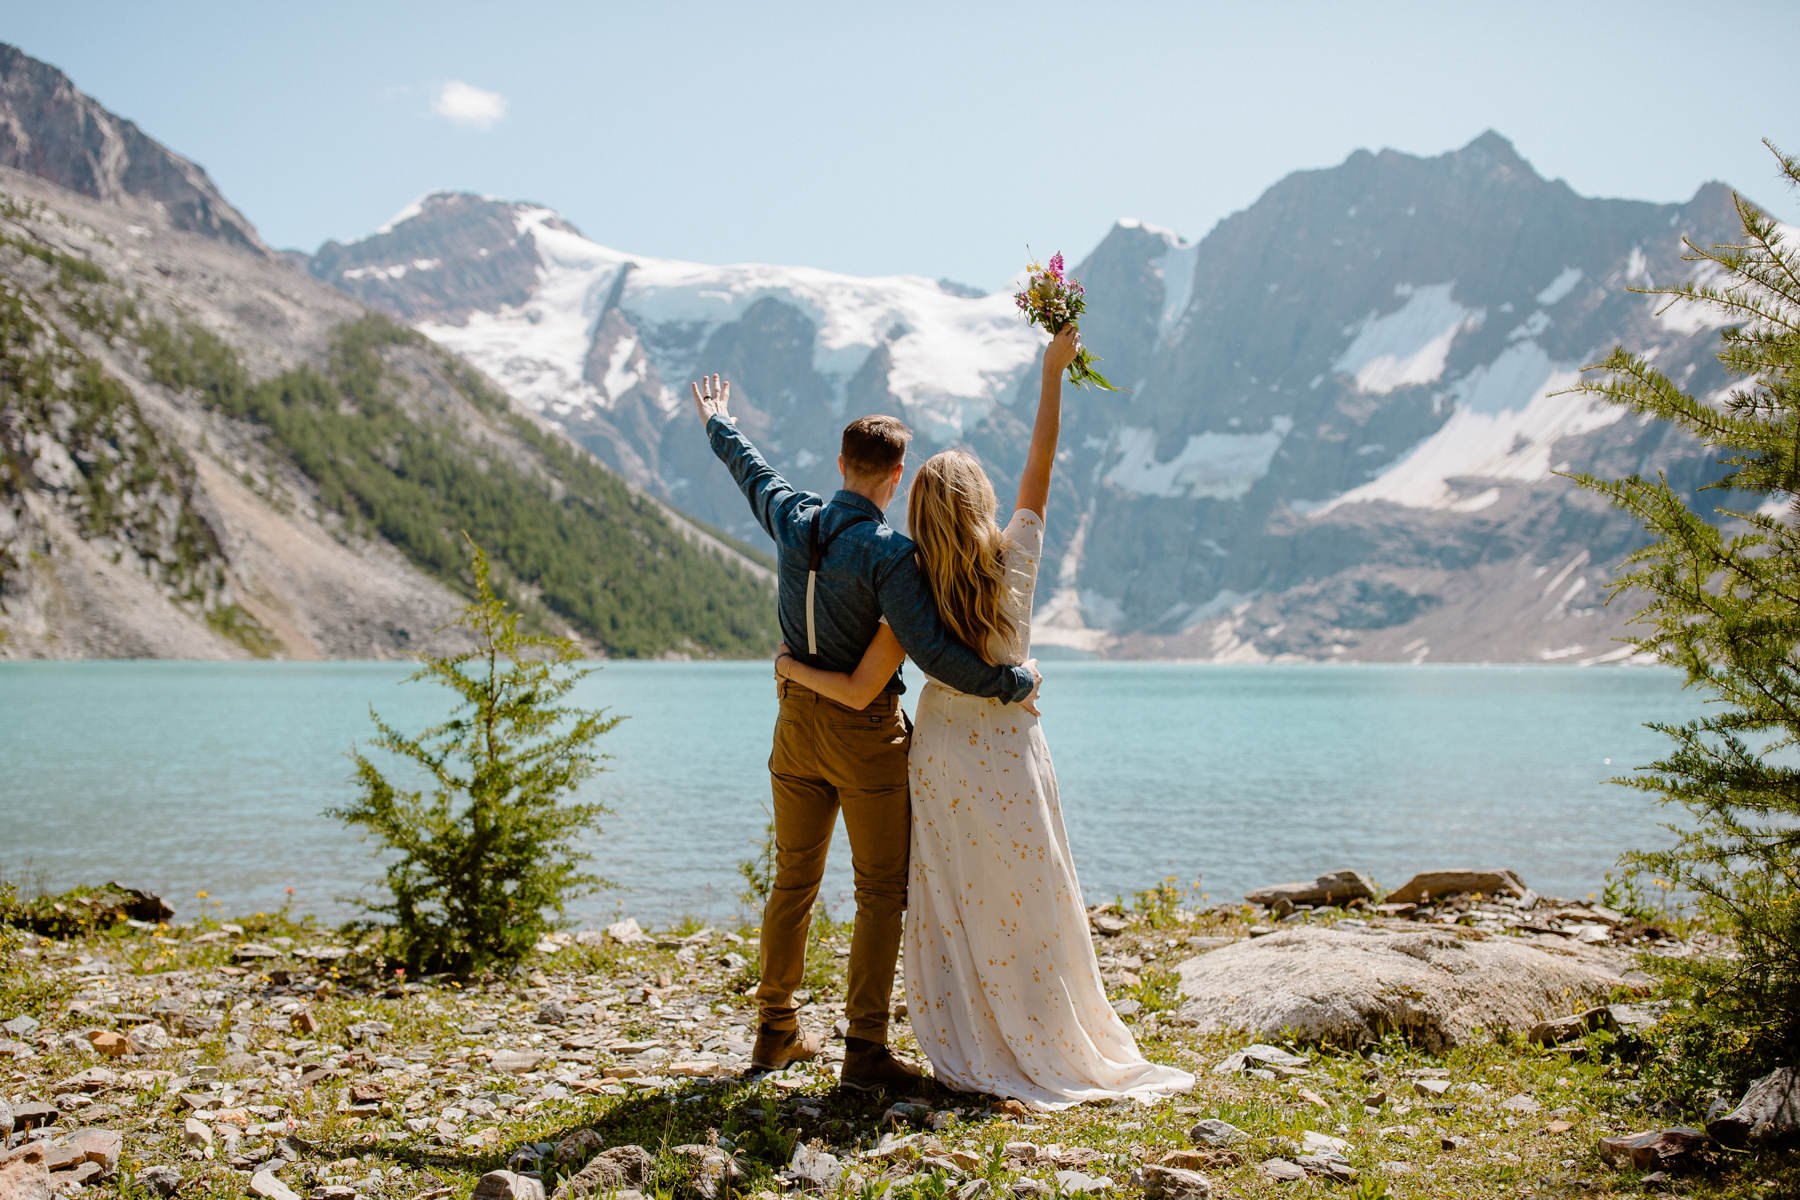 Adventure Elopement Photographers at a Hiking Wedding near Invermere - Photo 29